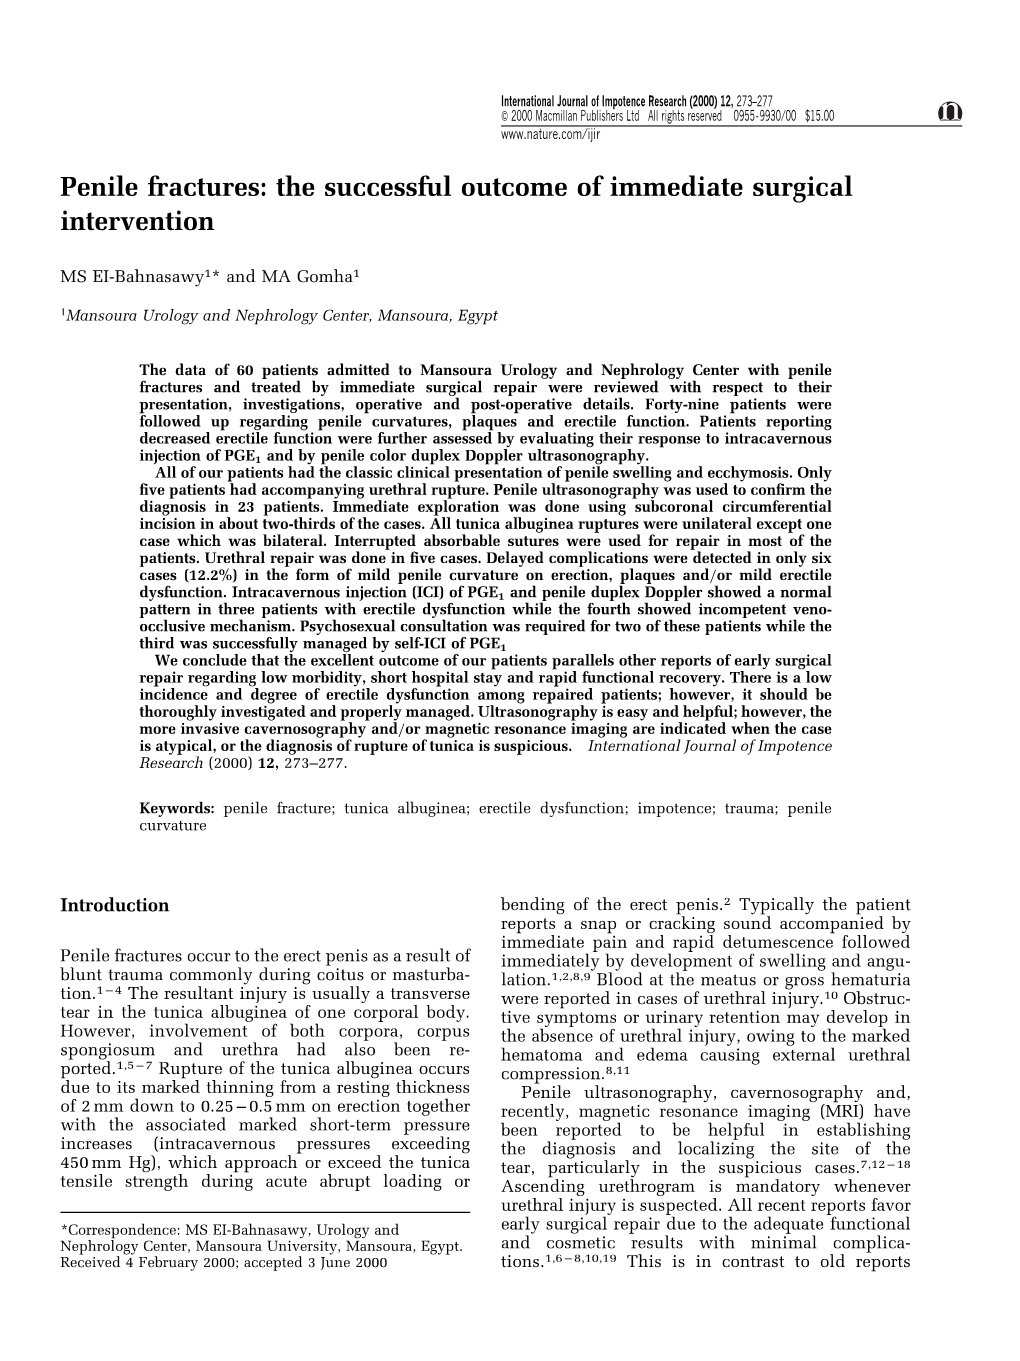 Penile Fractures: the Successful Outcome of Immediate Surgical Intervention